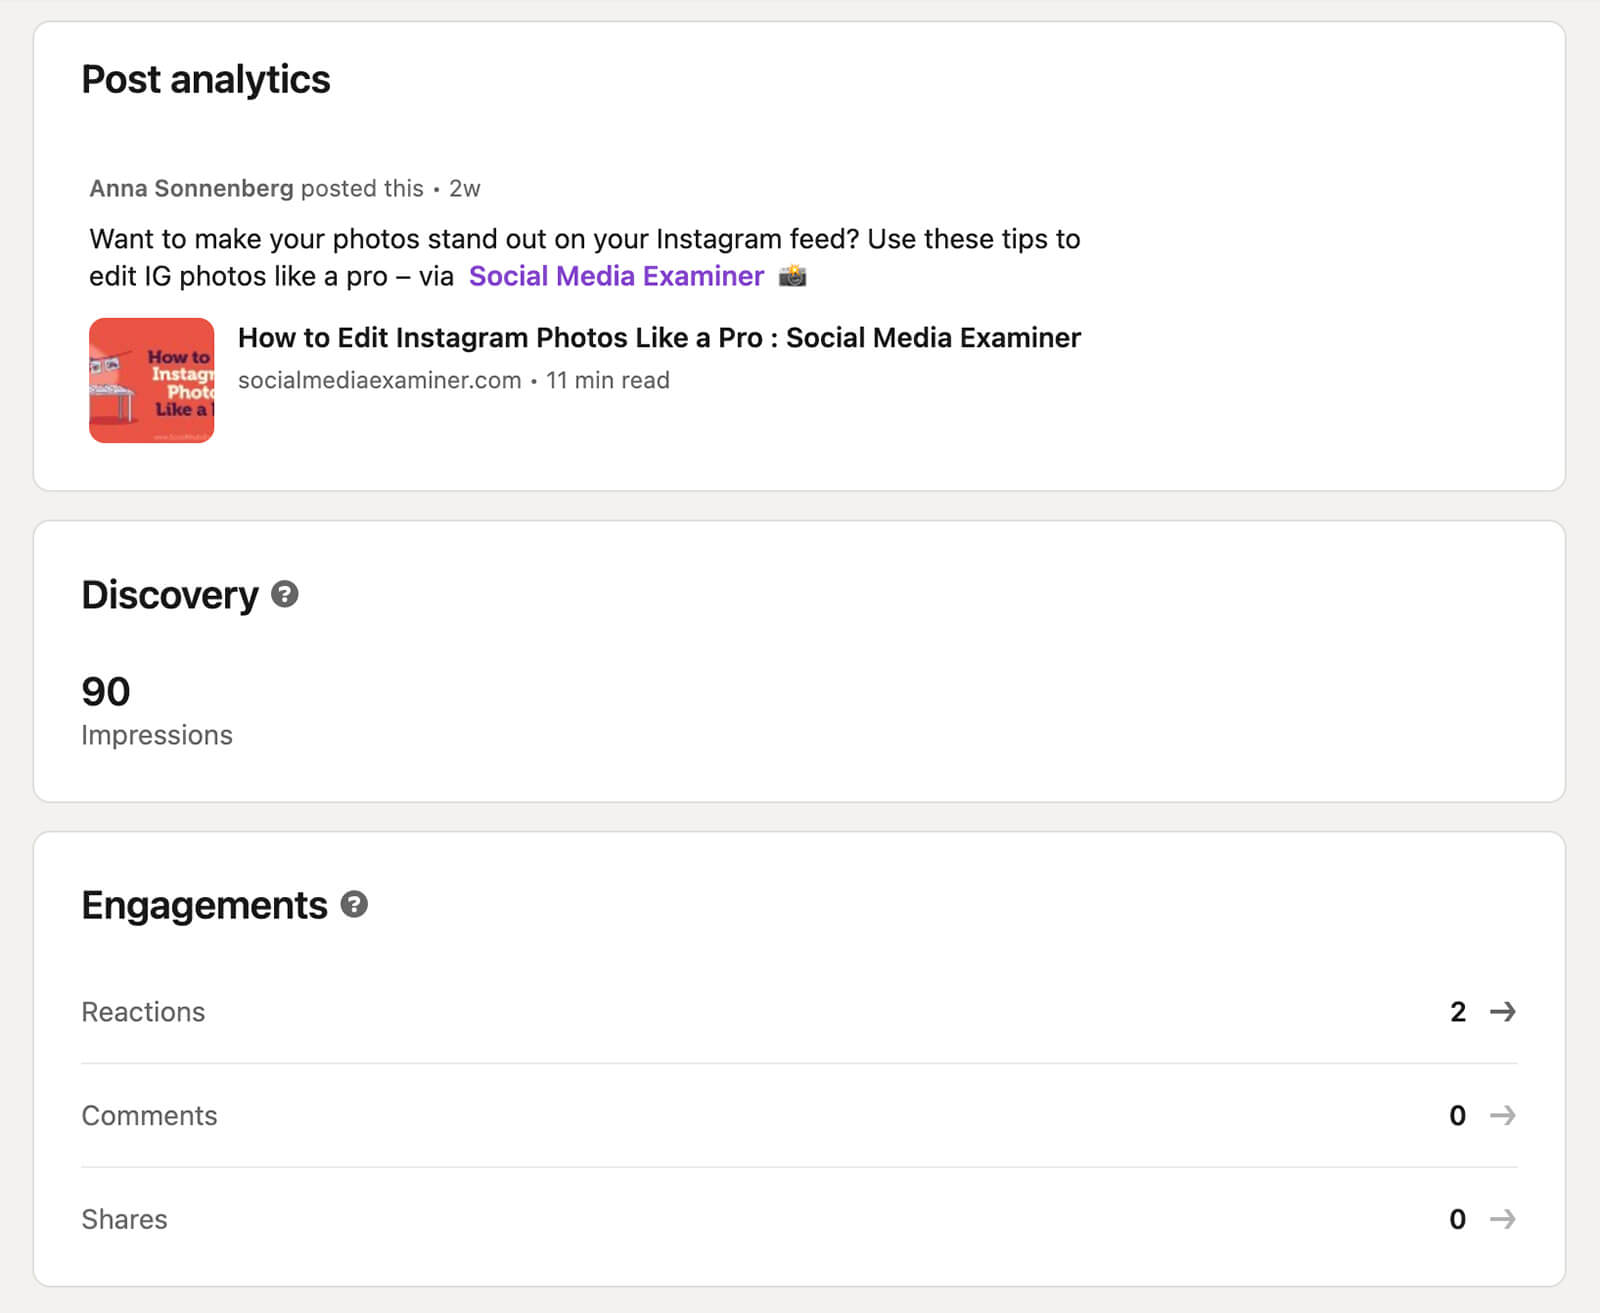 how-to-use-evaluate-linkedin-content-analytics-linkedin-personal-post-analytics-discovery-engagements-example-14